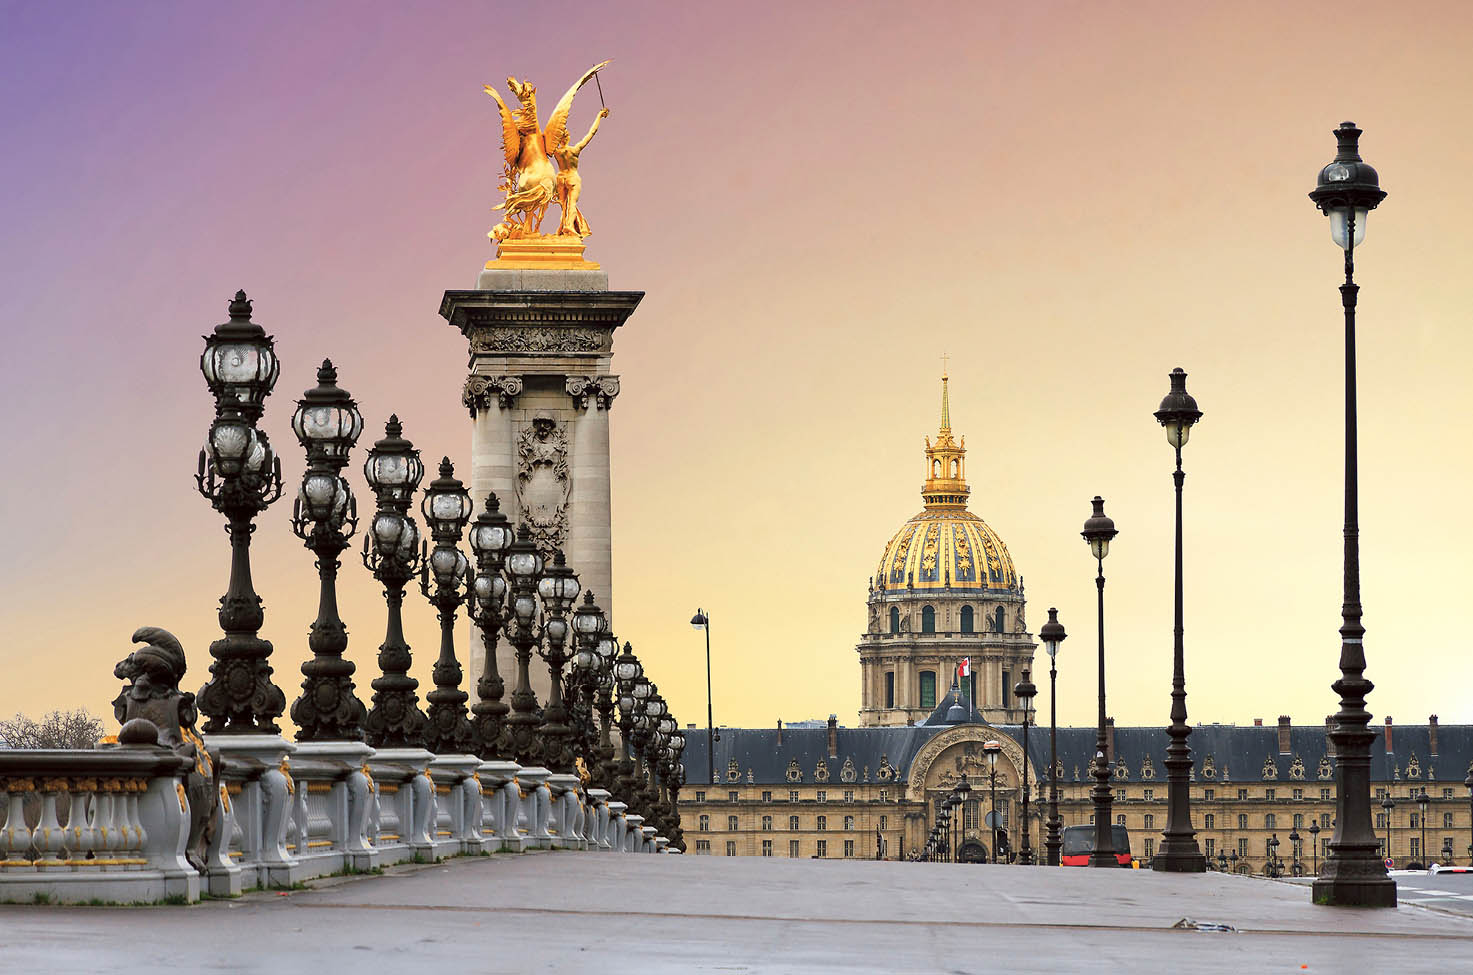 Pont Alexandre 3rd with rows of ornate black lampposts and a golden statue